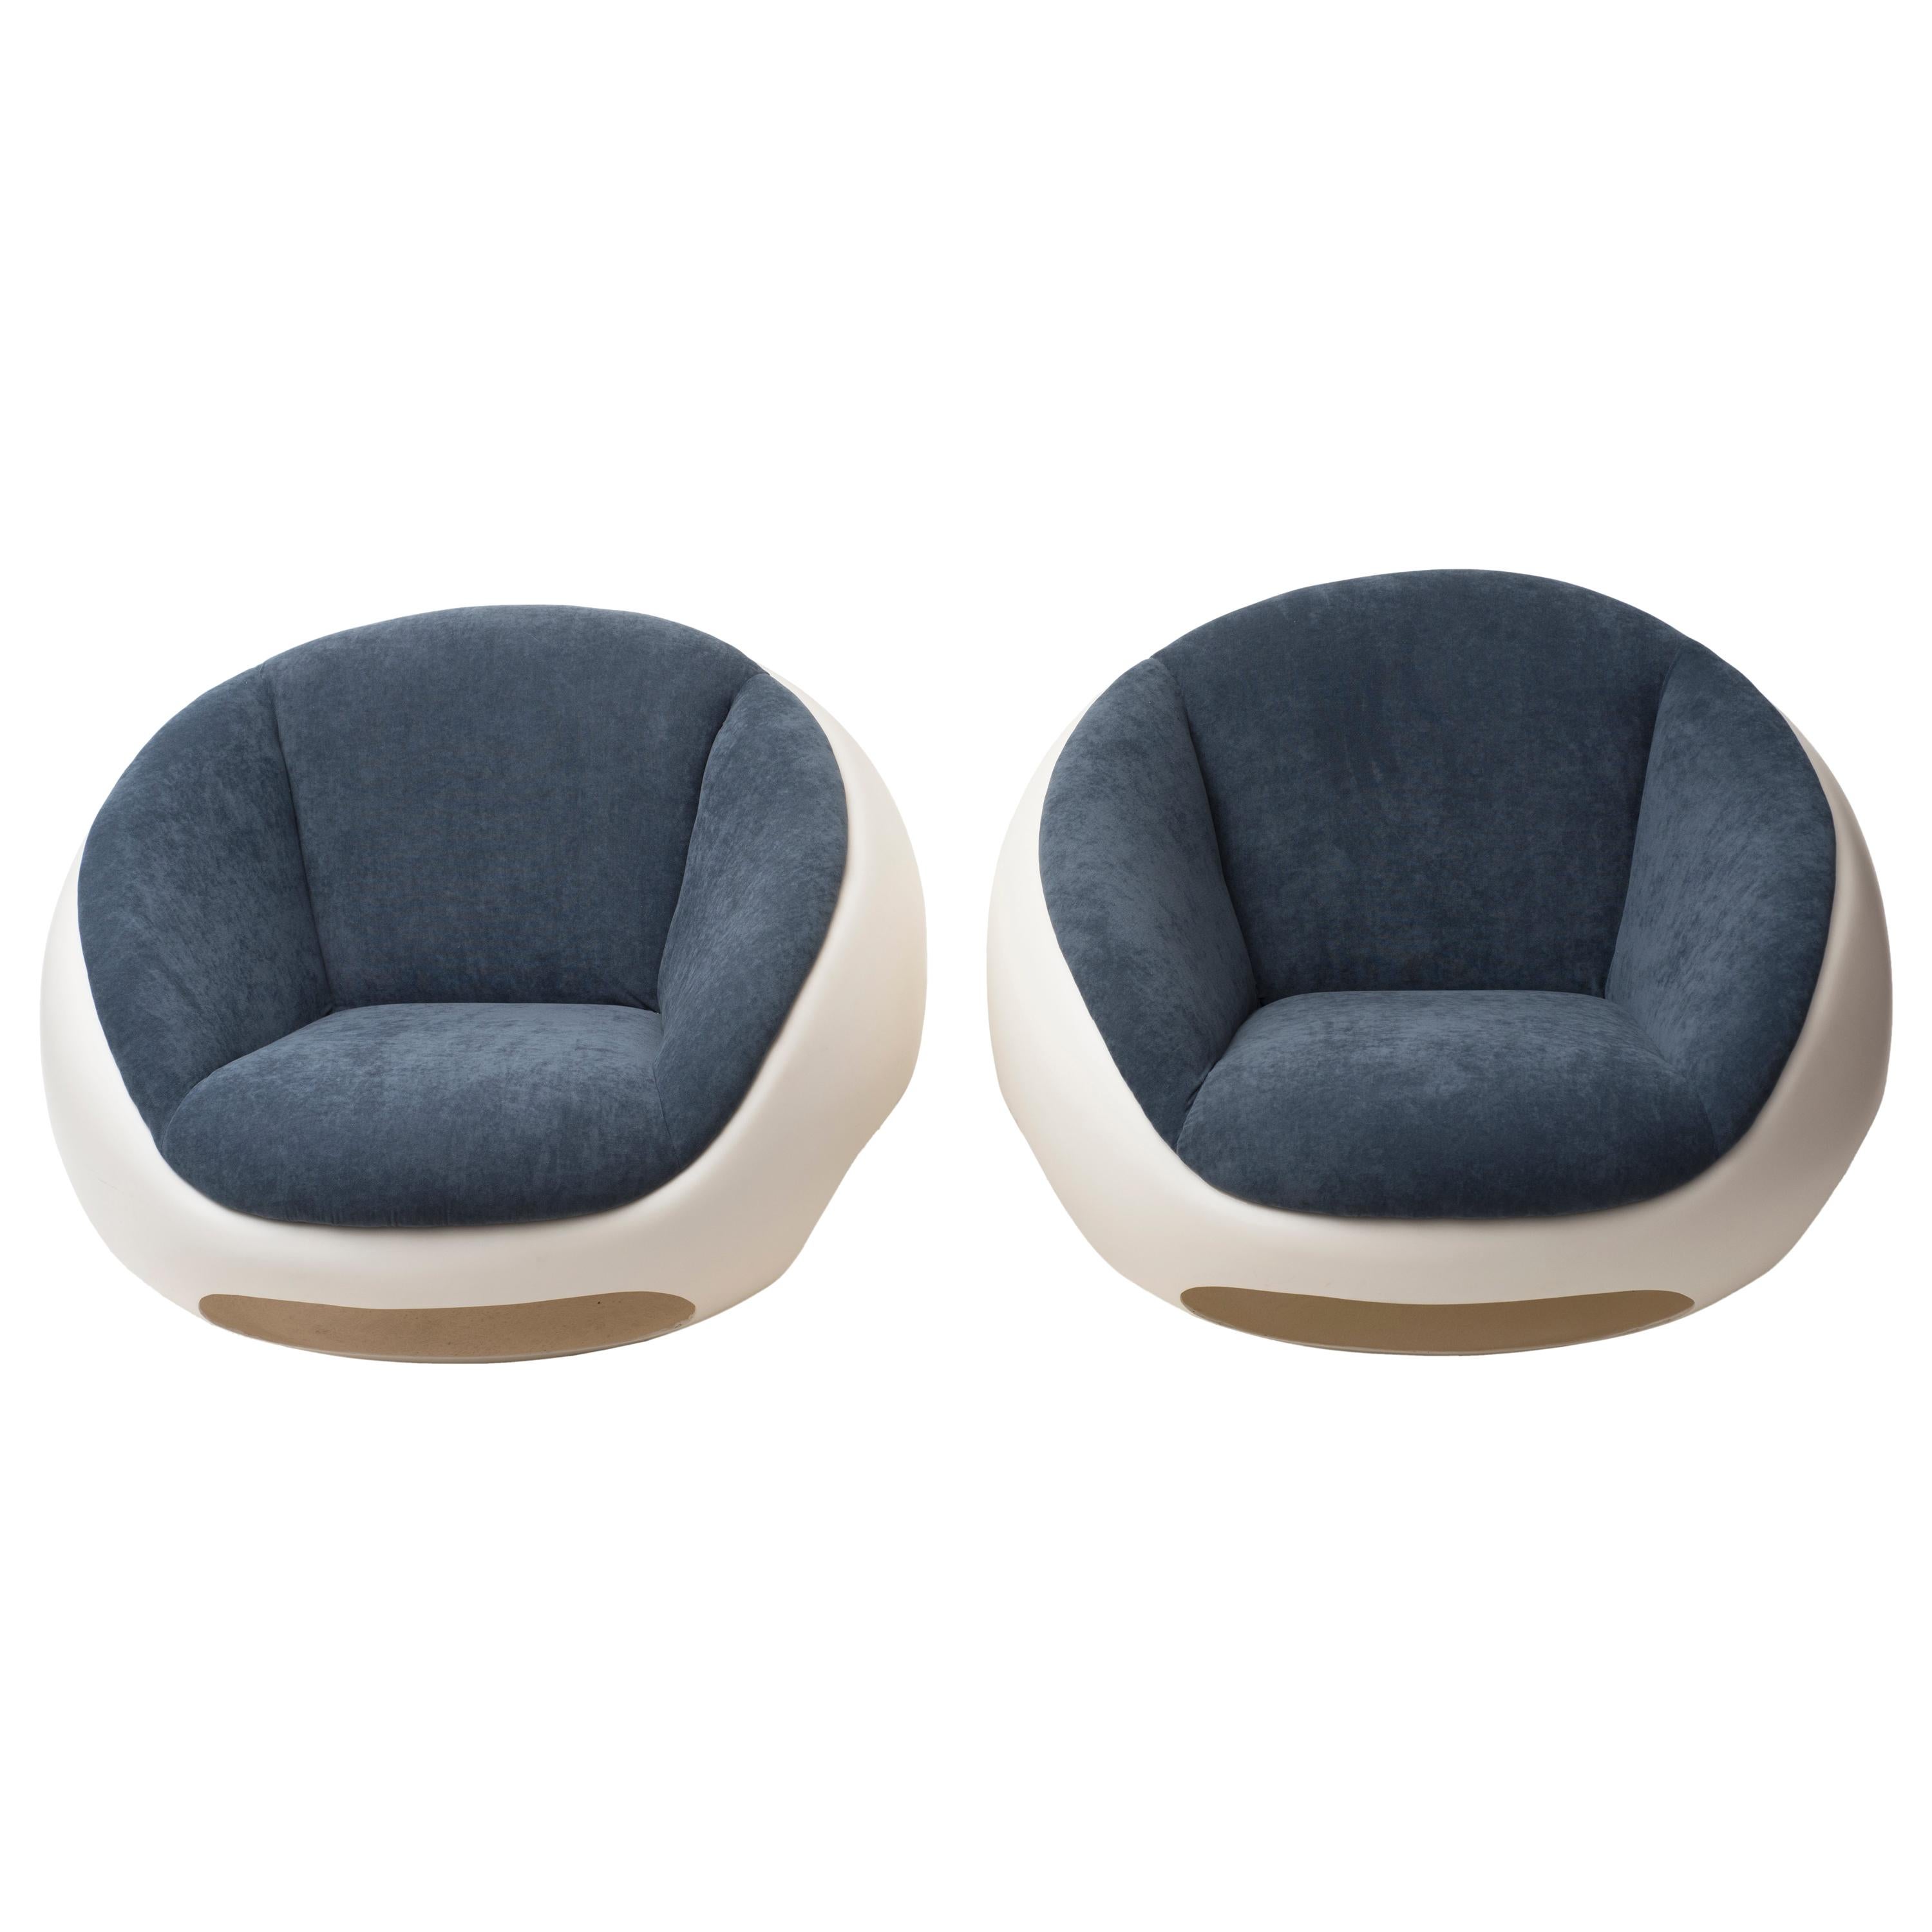 Pair of Fiberglass Lounge Chairs by Mario Sabot